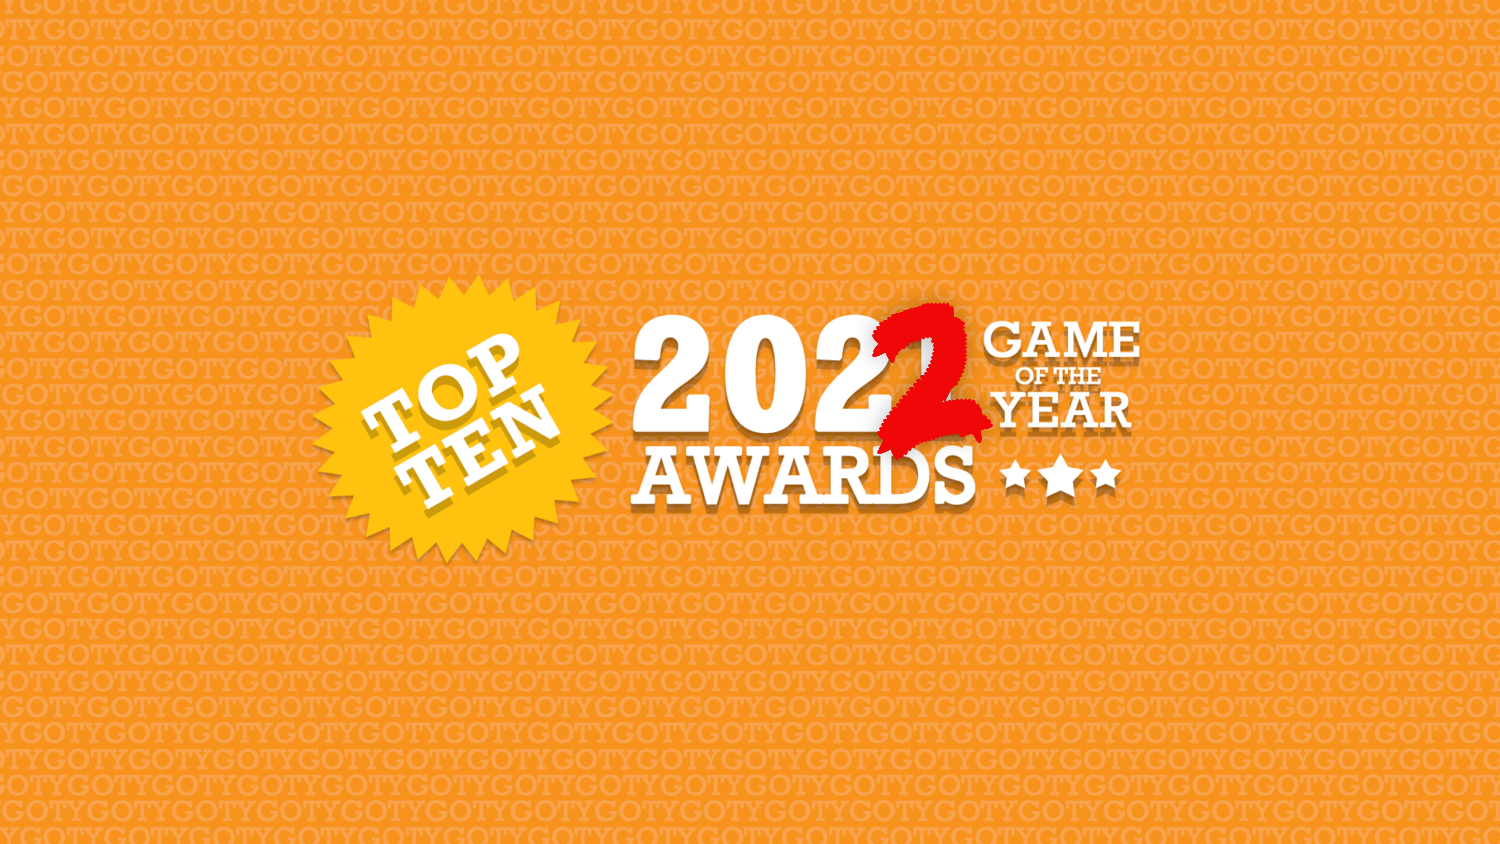 The Game Awards 2022: 200+ Full Sail Grads Credited on the Year's Top Games